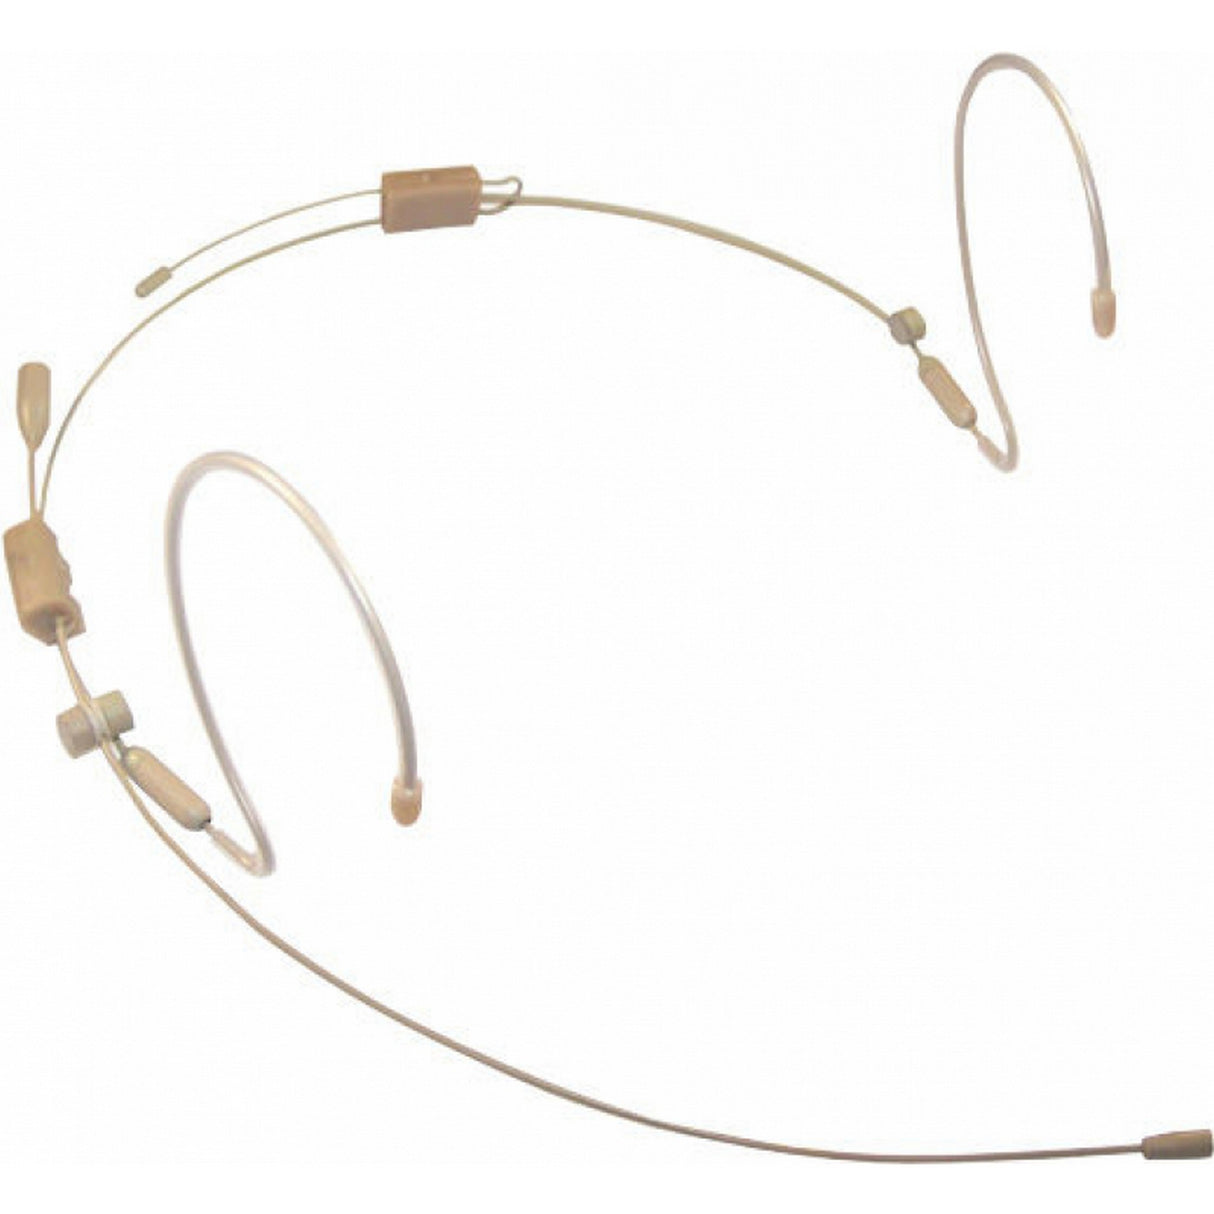 Provider Series PSM1 Omnidirectional Dual-Ear Headworn Microphone with TA3F for EV 3000, Tan